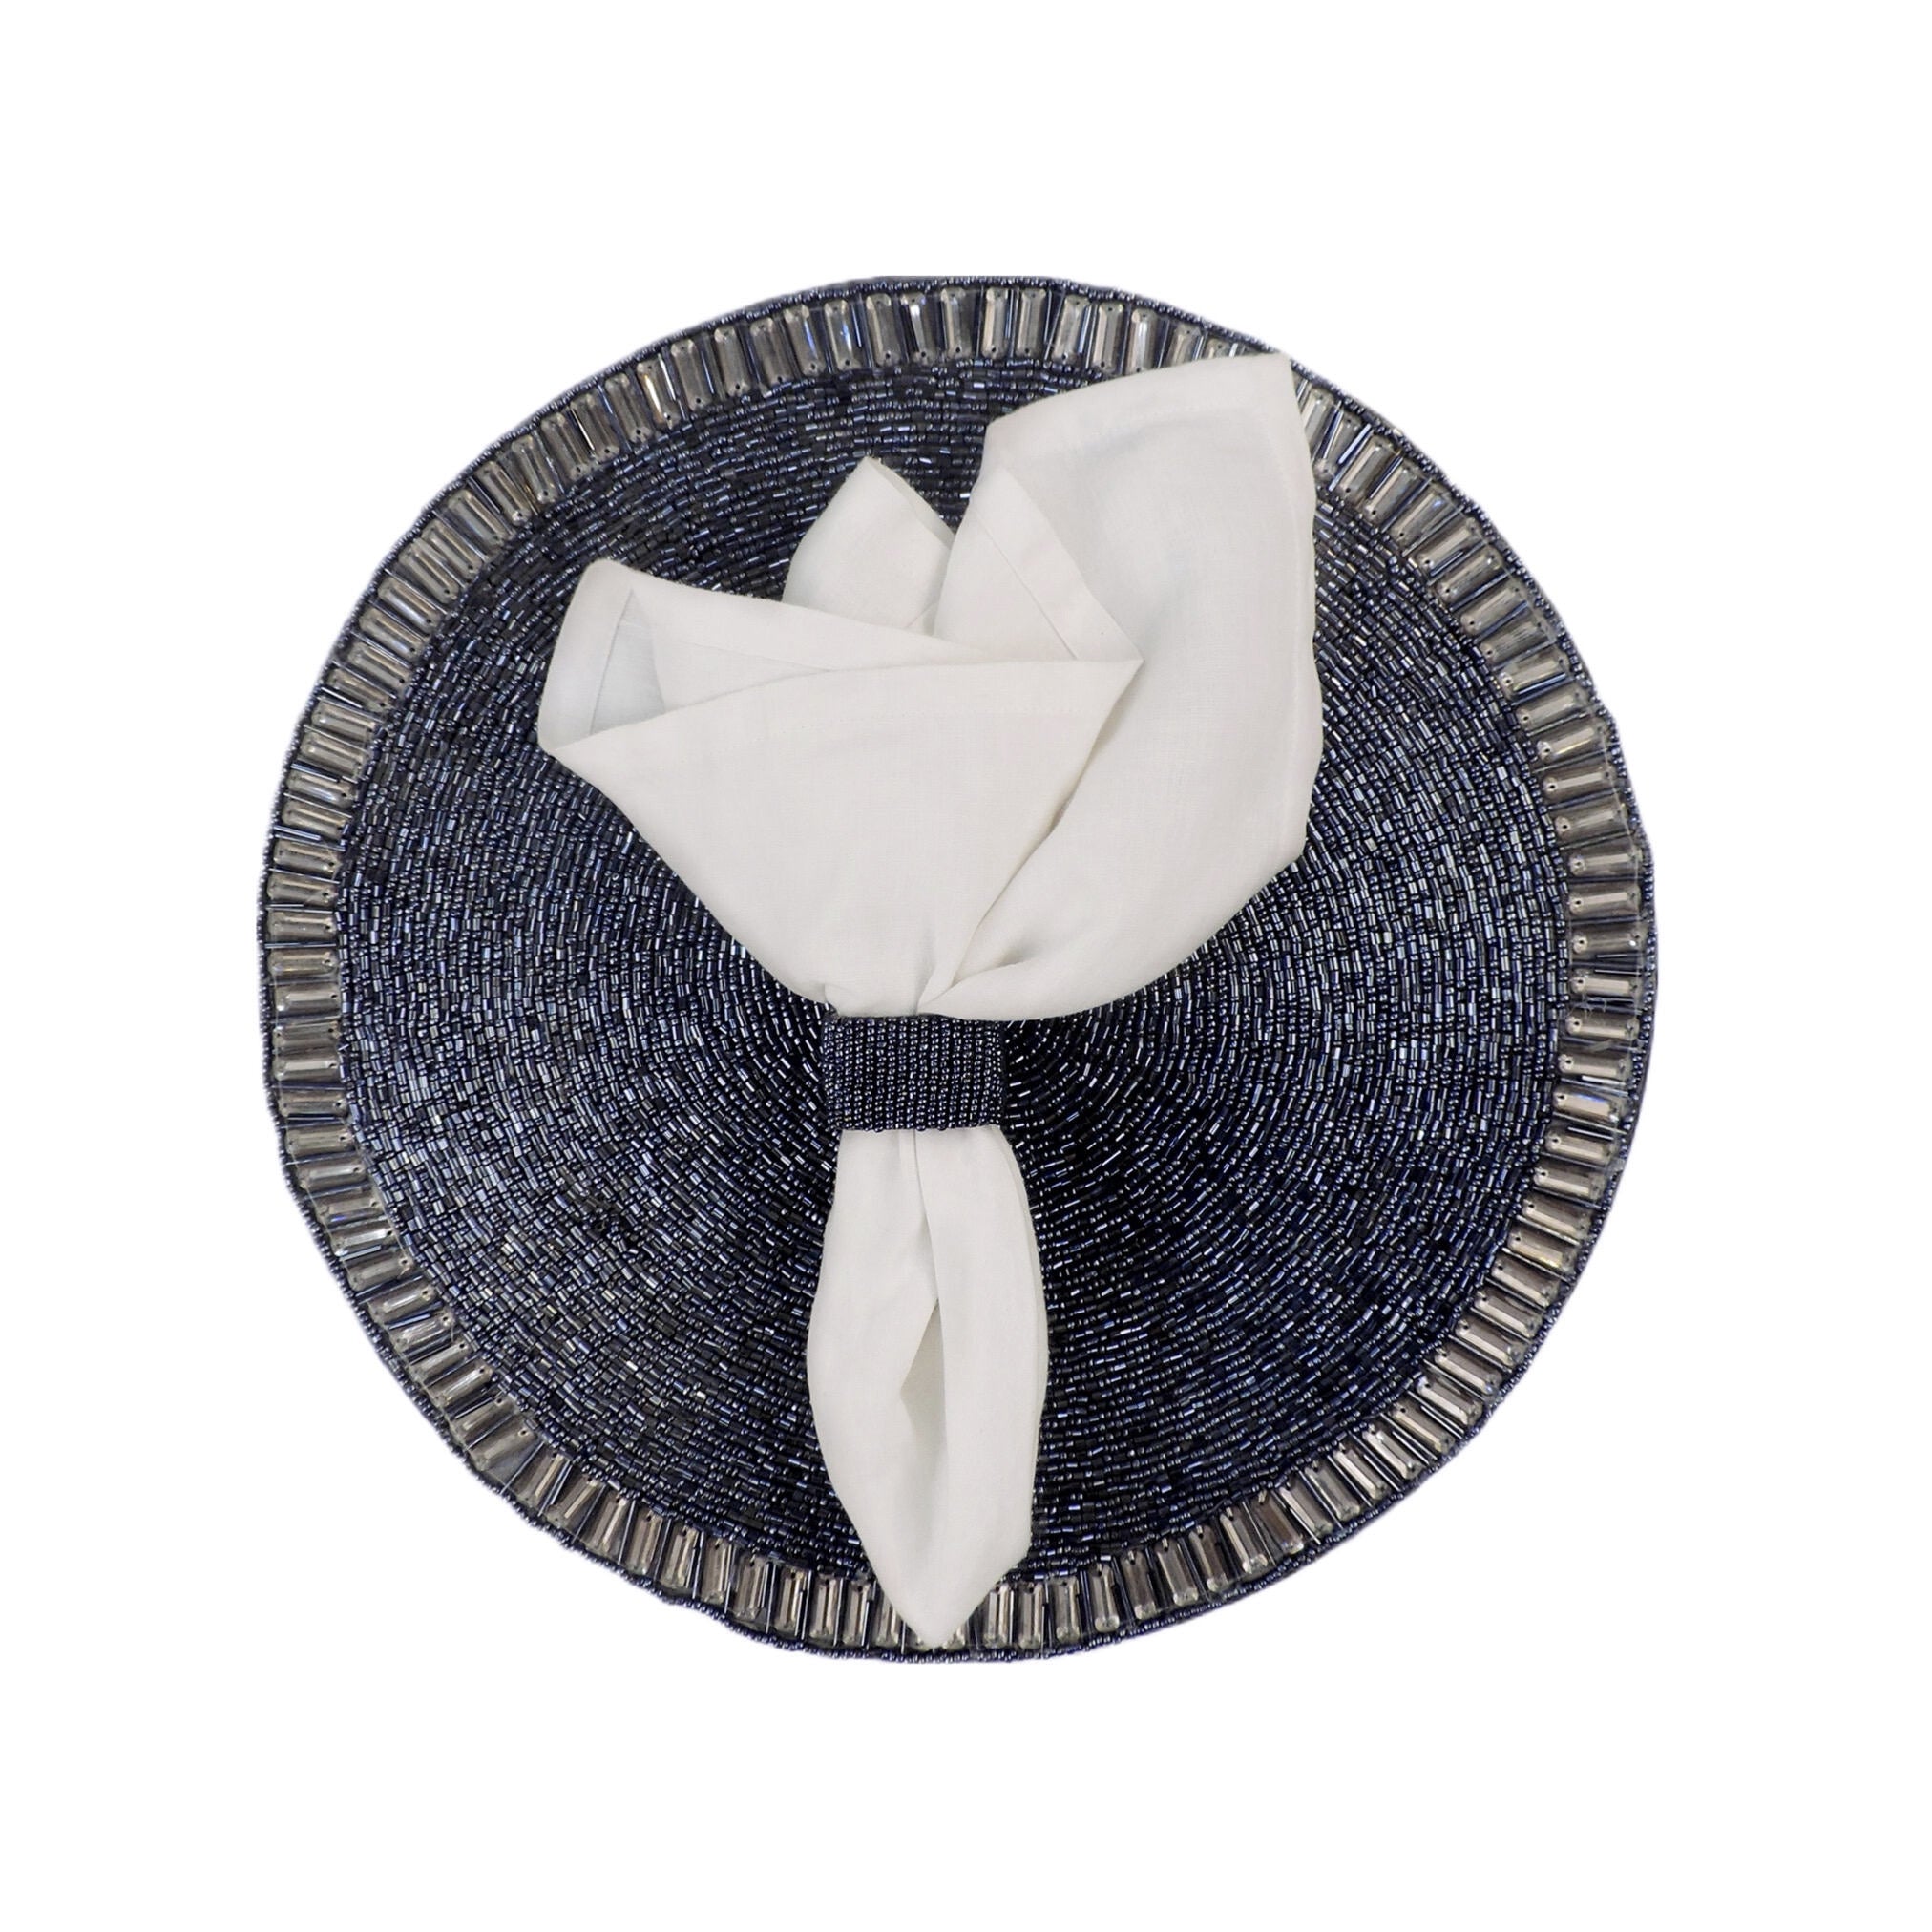 Glam Crystal Bead Embroidered Placemat in Luster Blue, Set of 2/4